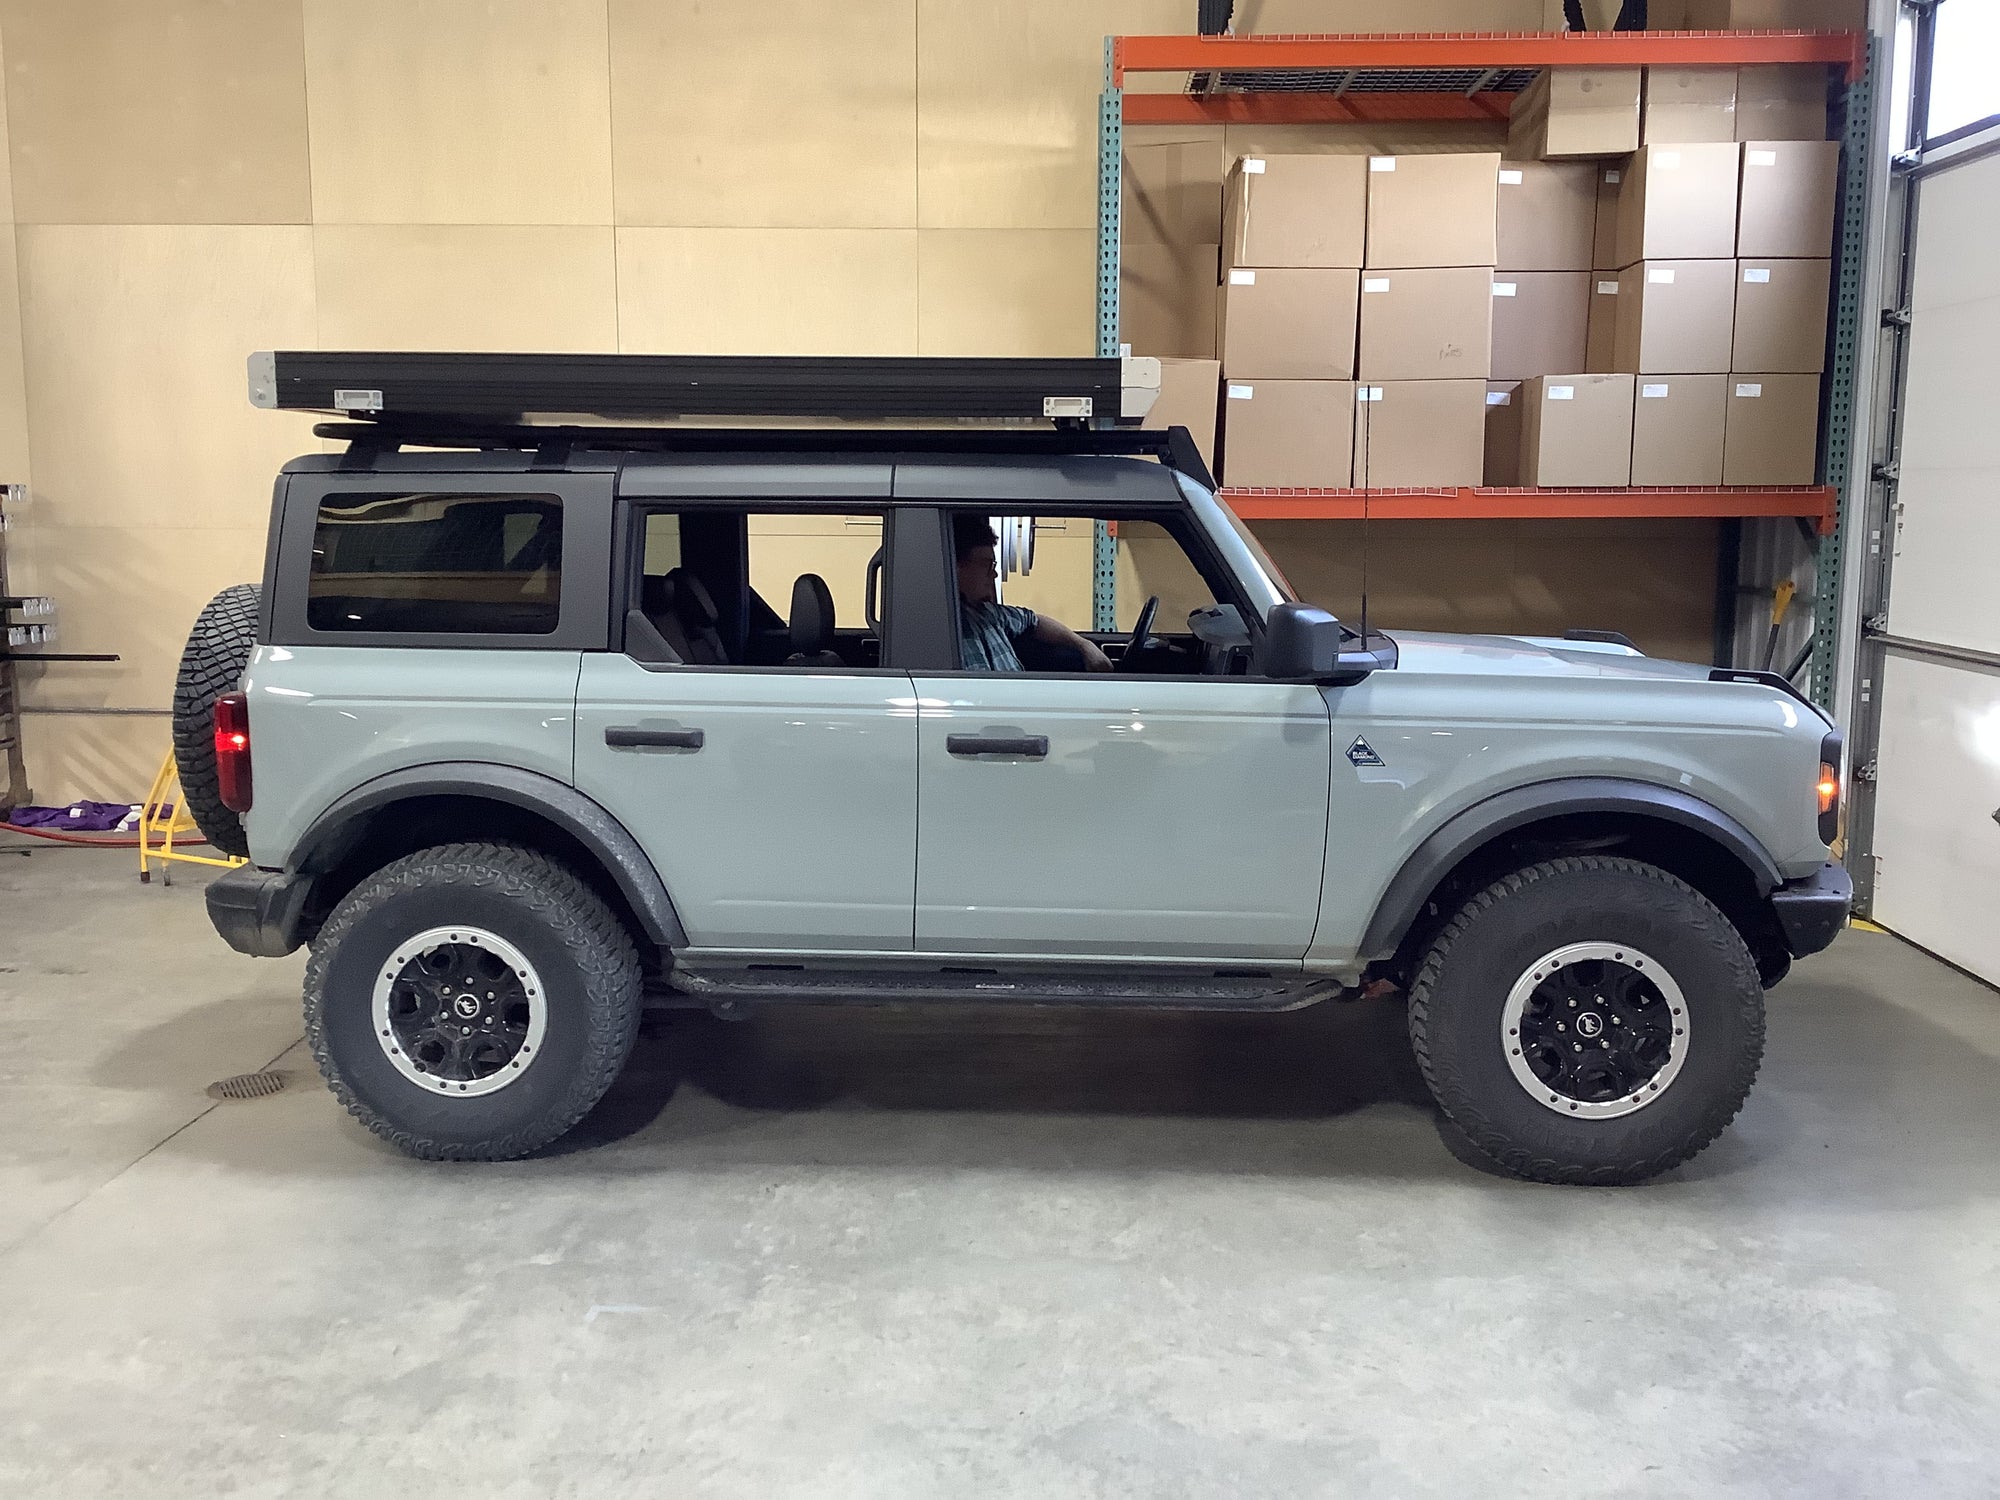 2021 Ford Bronco Rooftop Tent (RTT) - Build #597